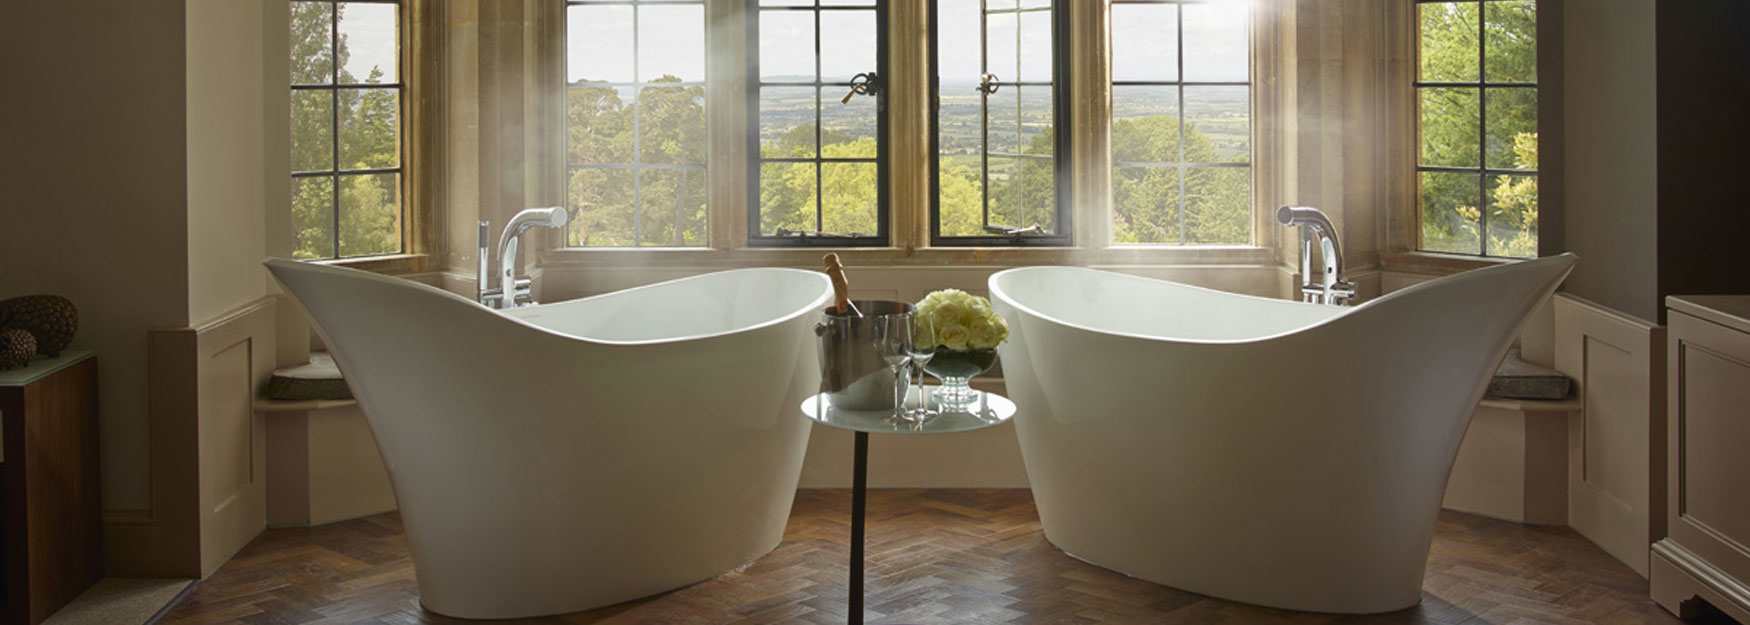 The baths in the Oak Suite at Foxhill Manor